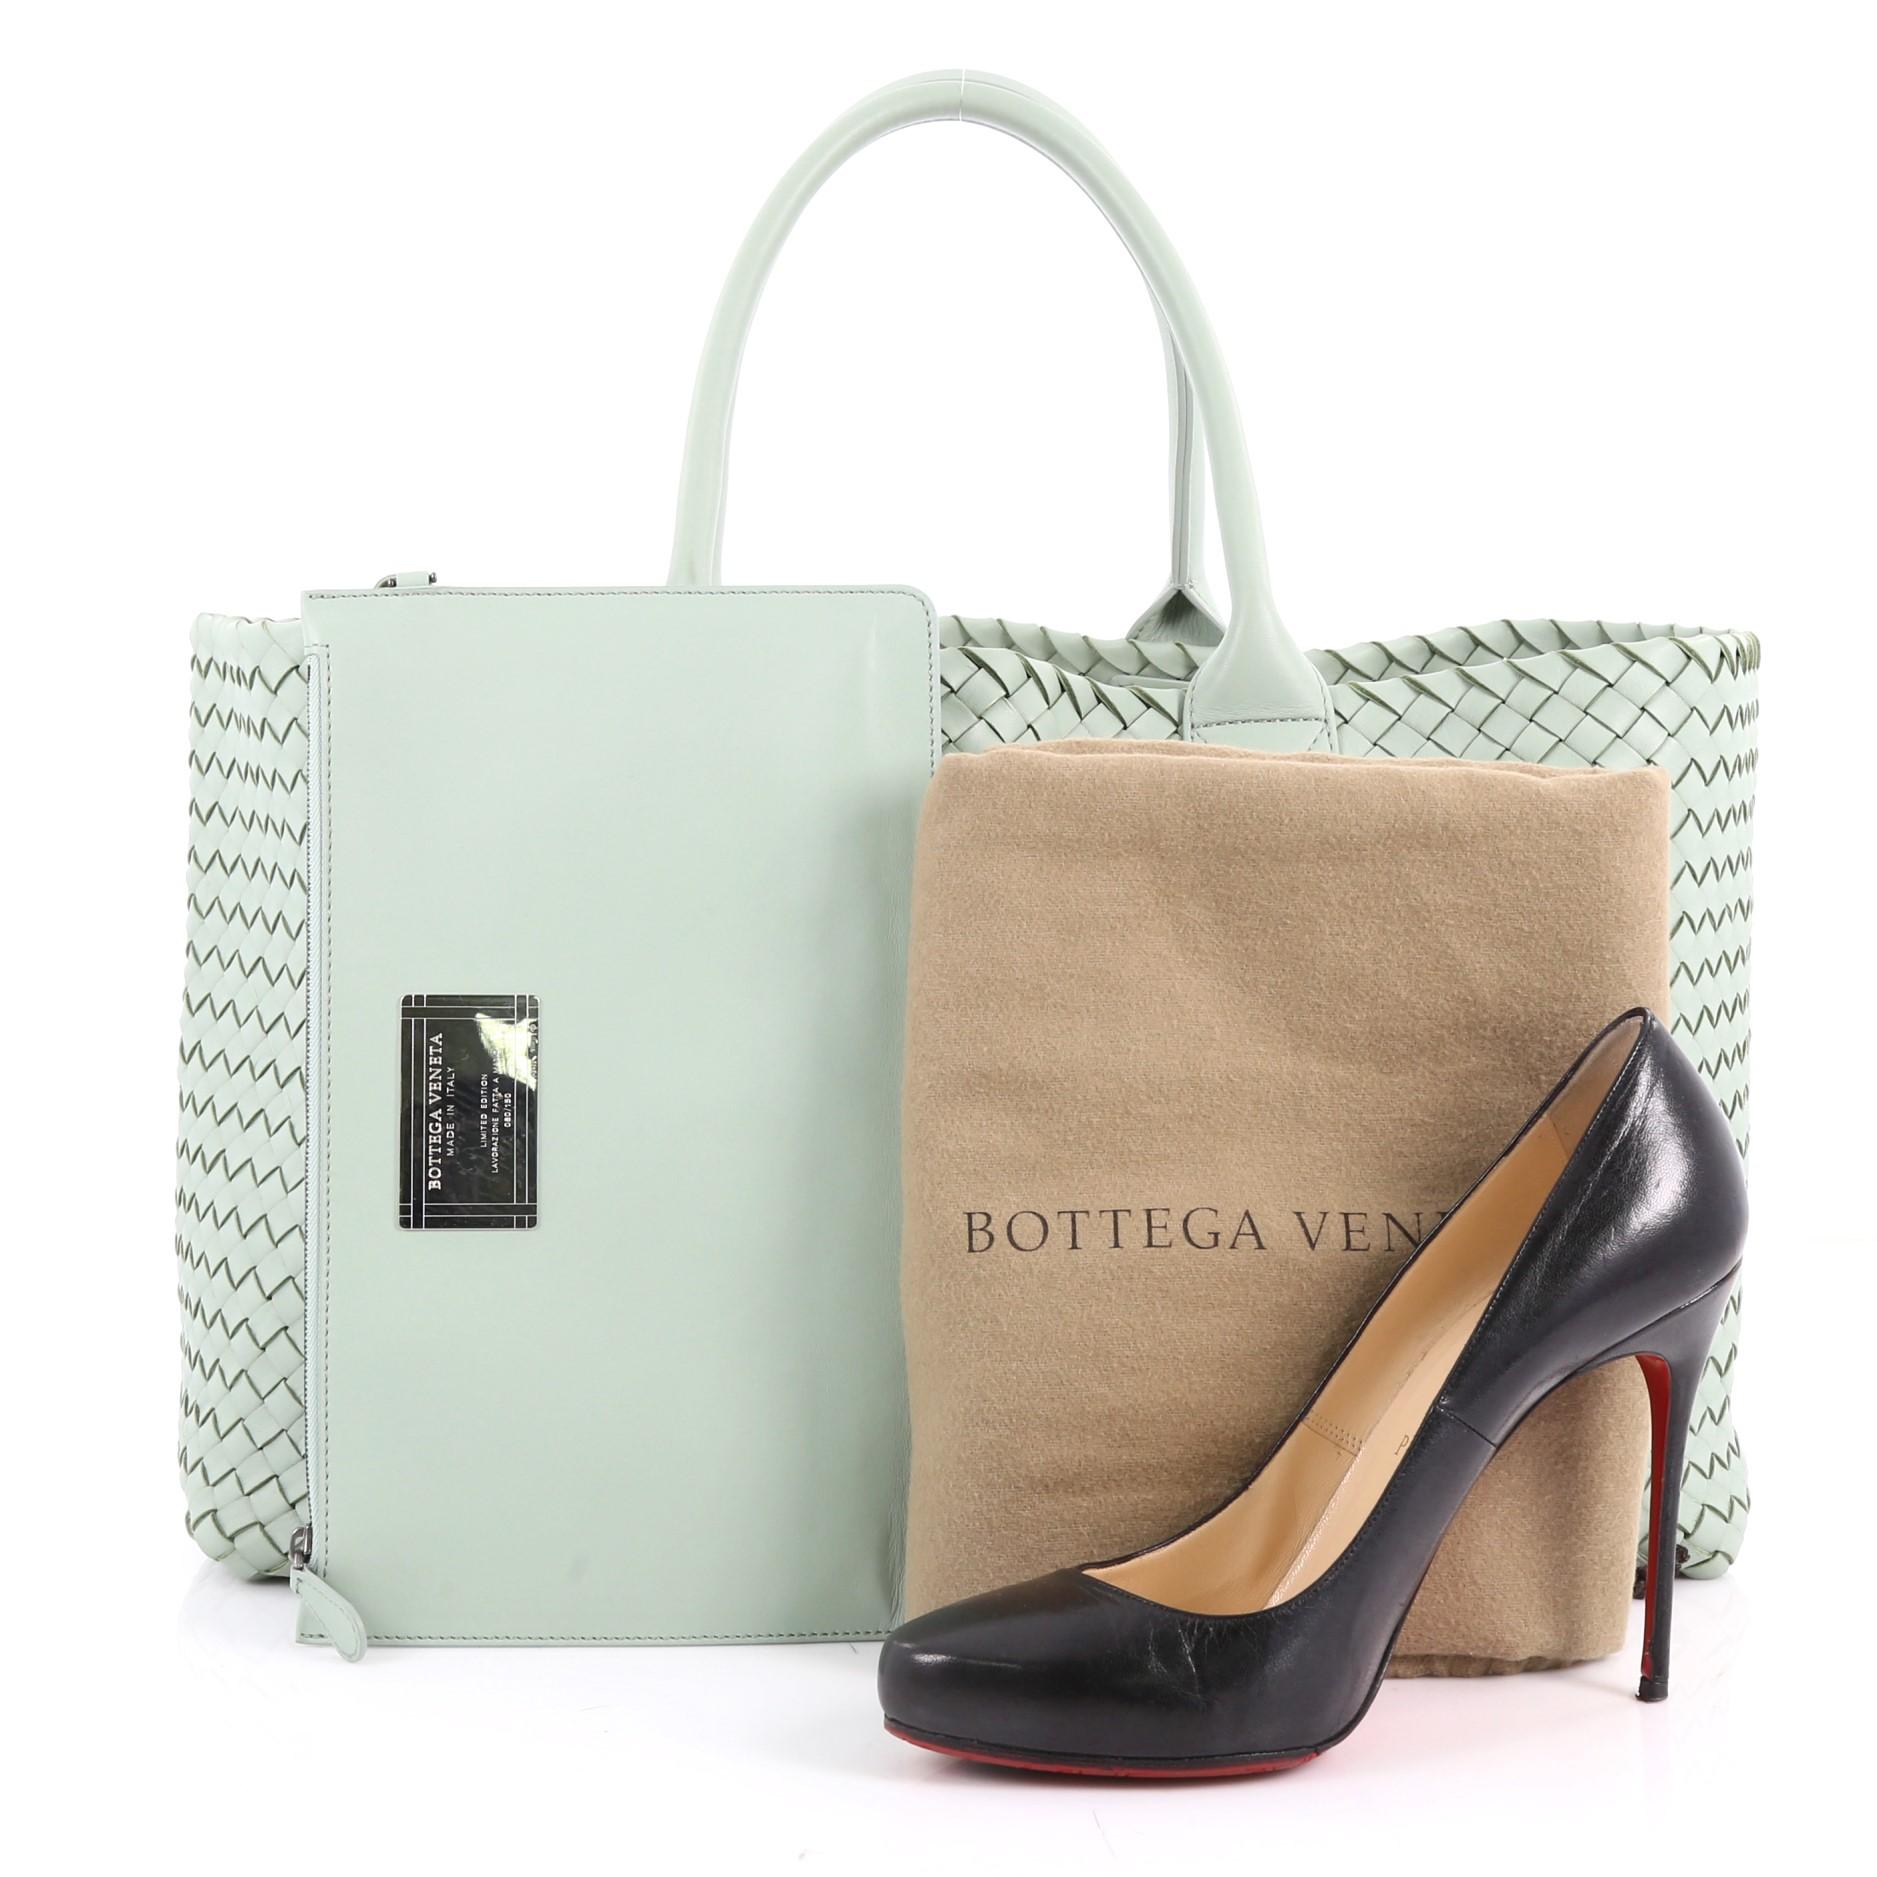 This authentic Bottega Veneta Cabat Tote Intrecciato Nappa Medium is a statement piece you can surely take from day to night. Beautifully crafted in mint green leather in Bottega Veneta's signature intrecciato woven method, this oversized stylish